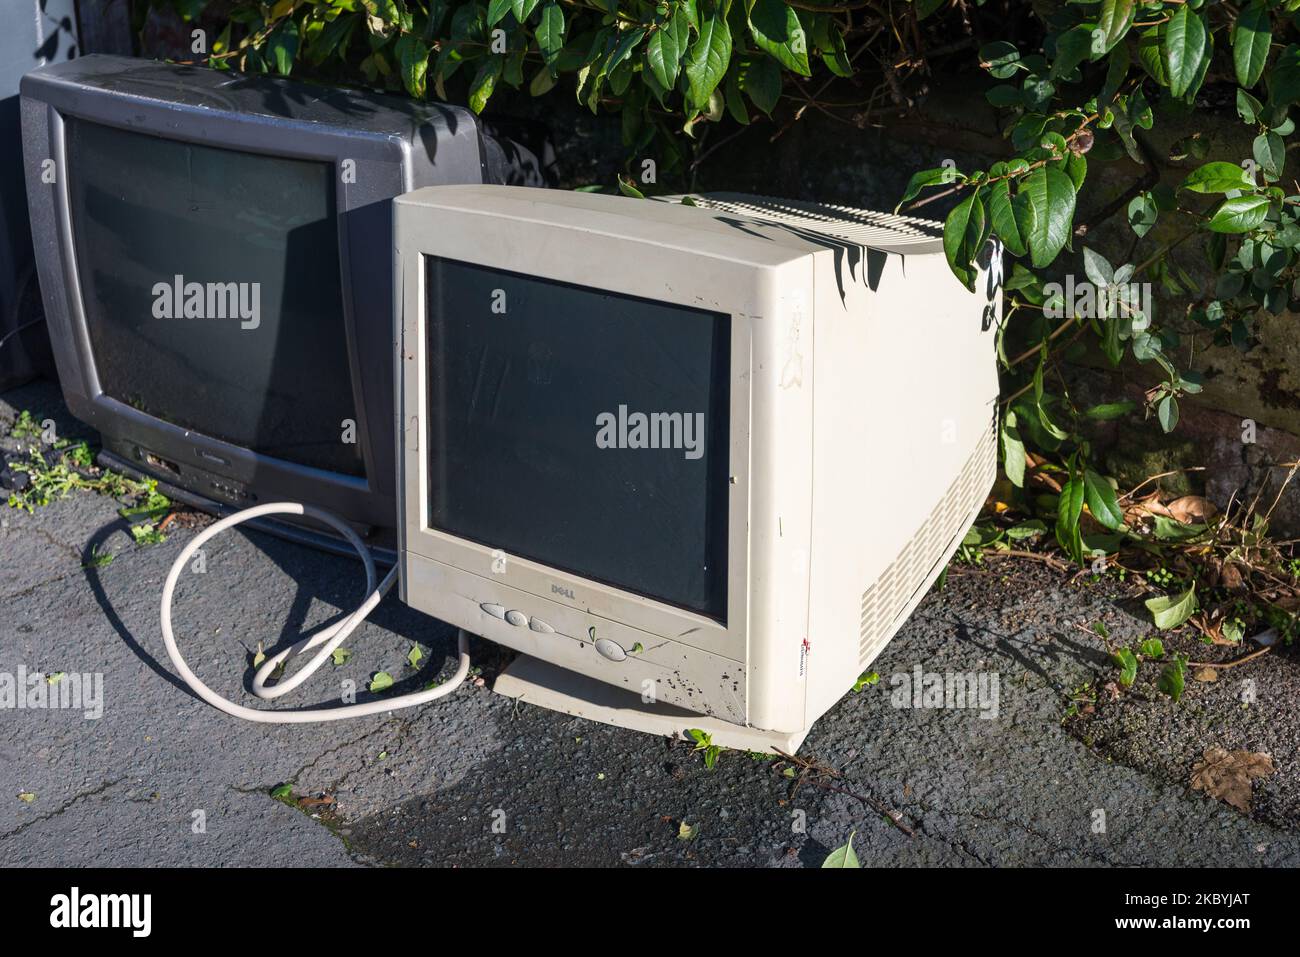 Old crt television and computer monitor left on the pavement for collection or disposal Stock Photo